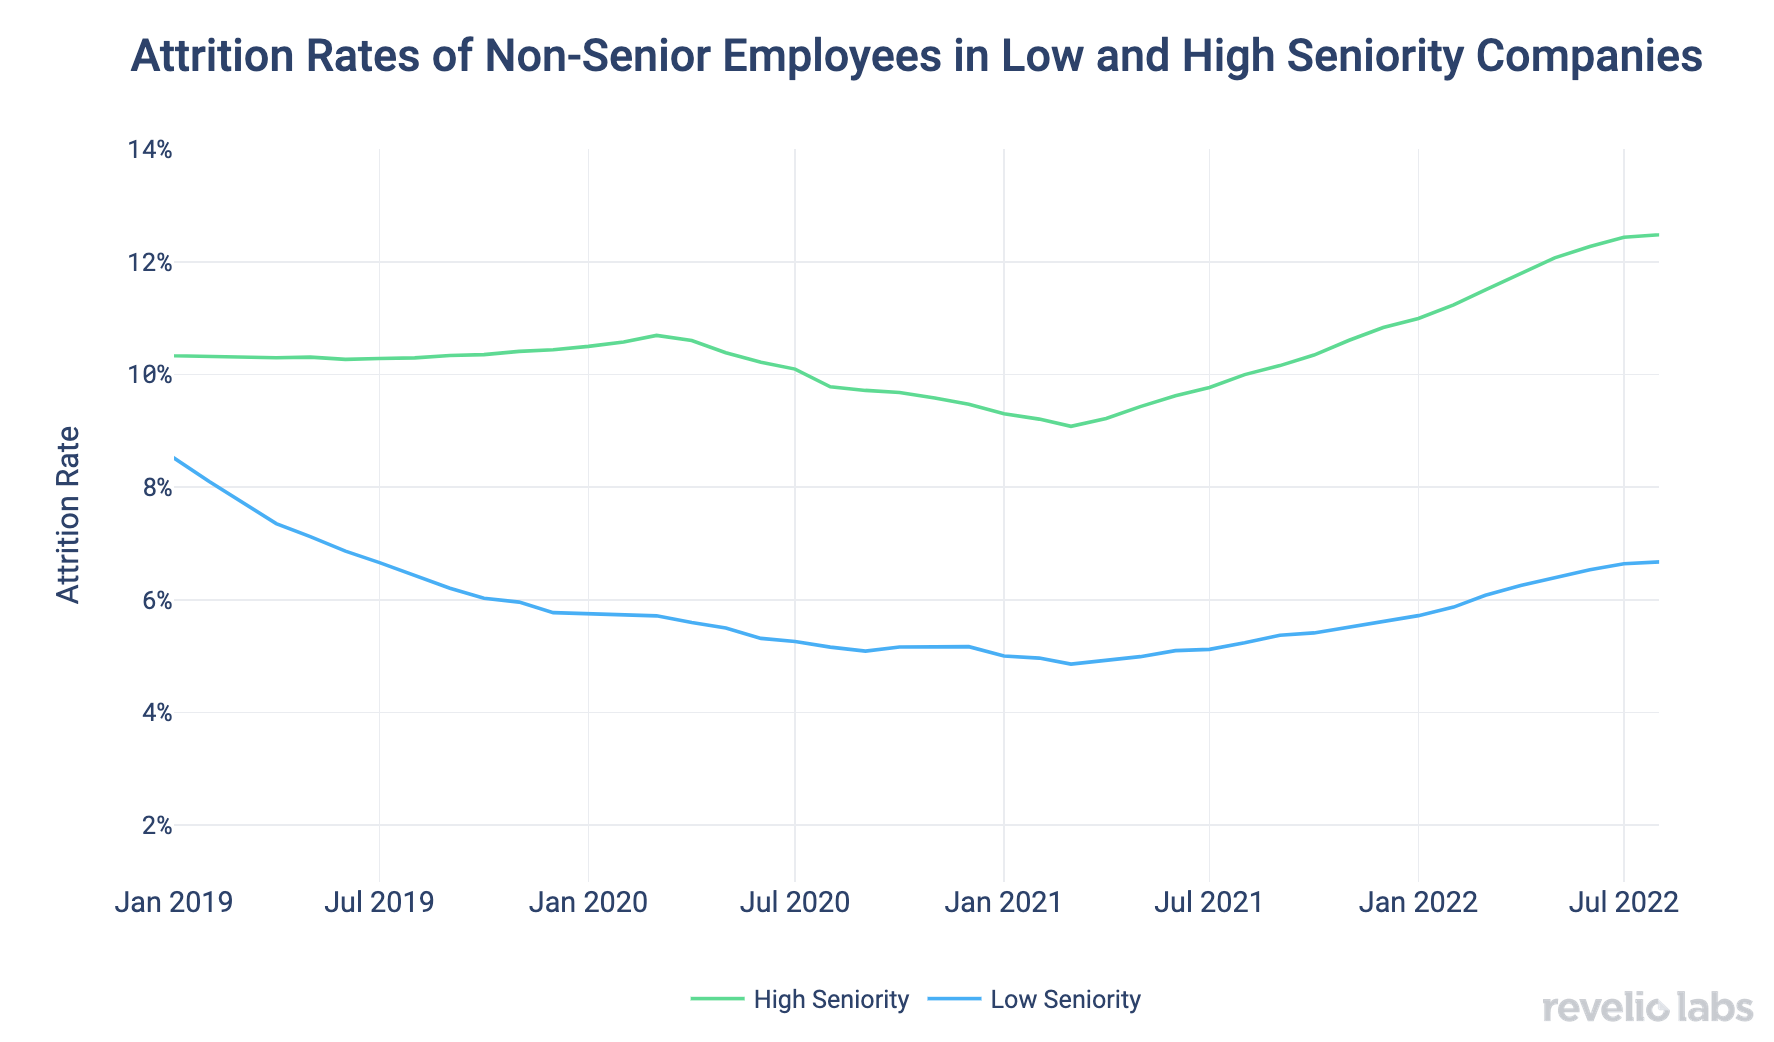 Attrition rates of non-senior employees in low and high seniority companies